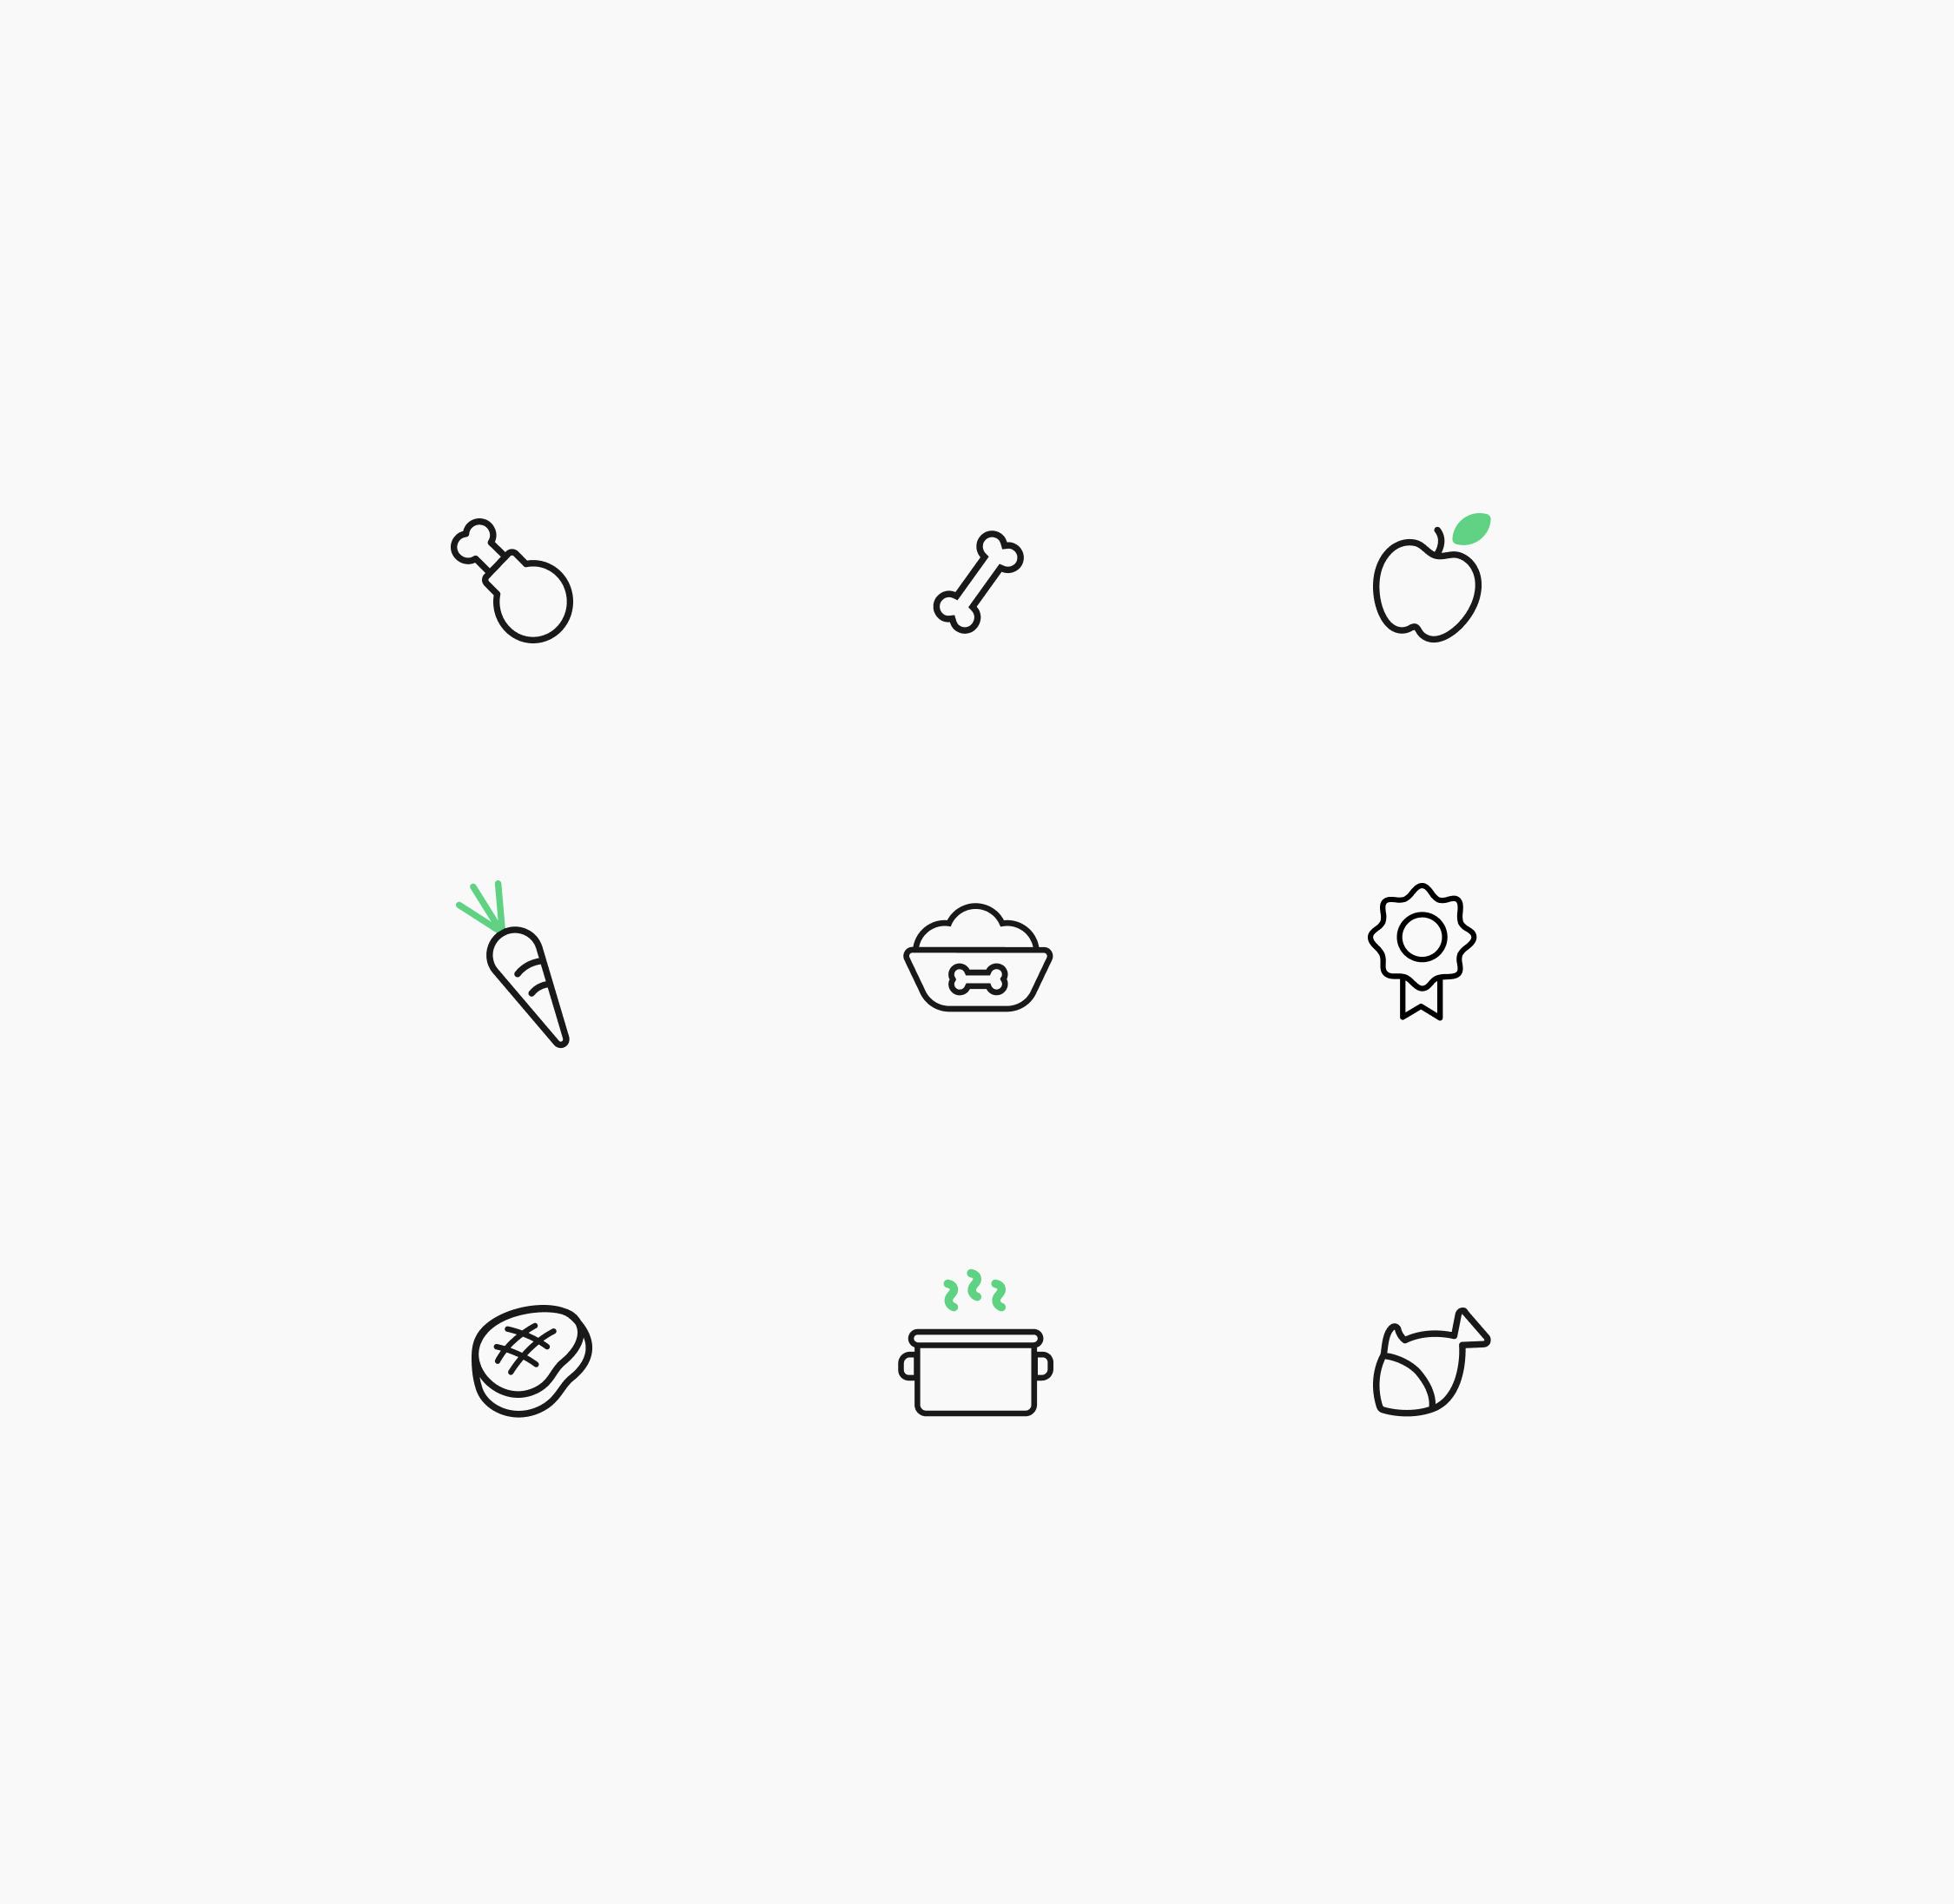 Some of the icons we created for the project